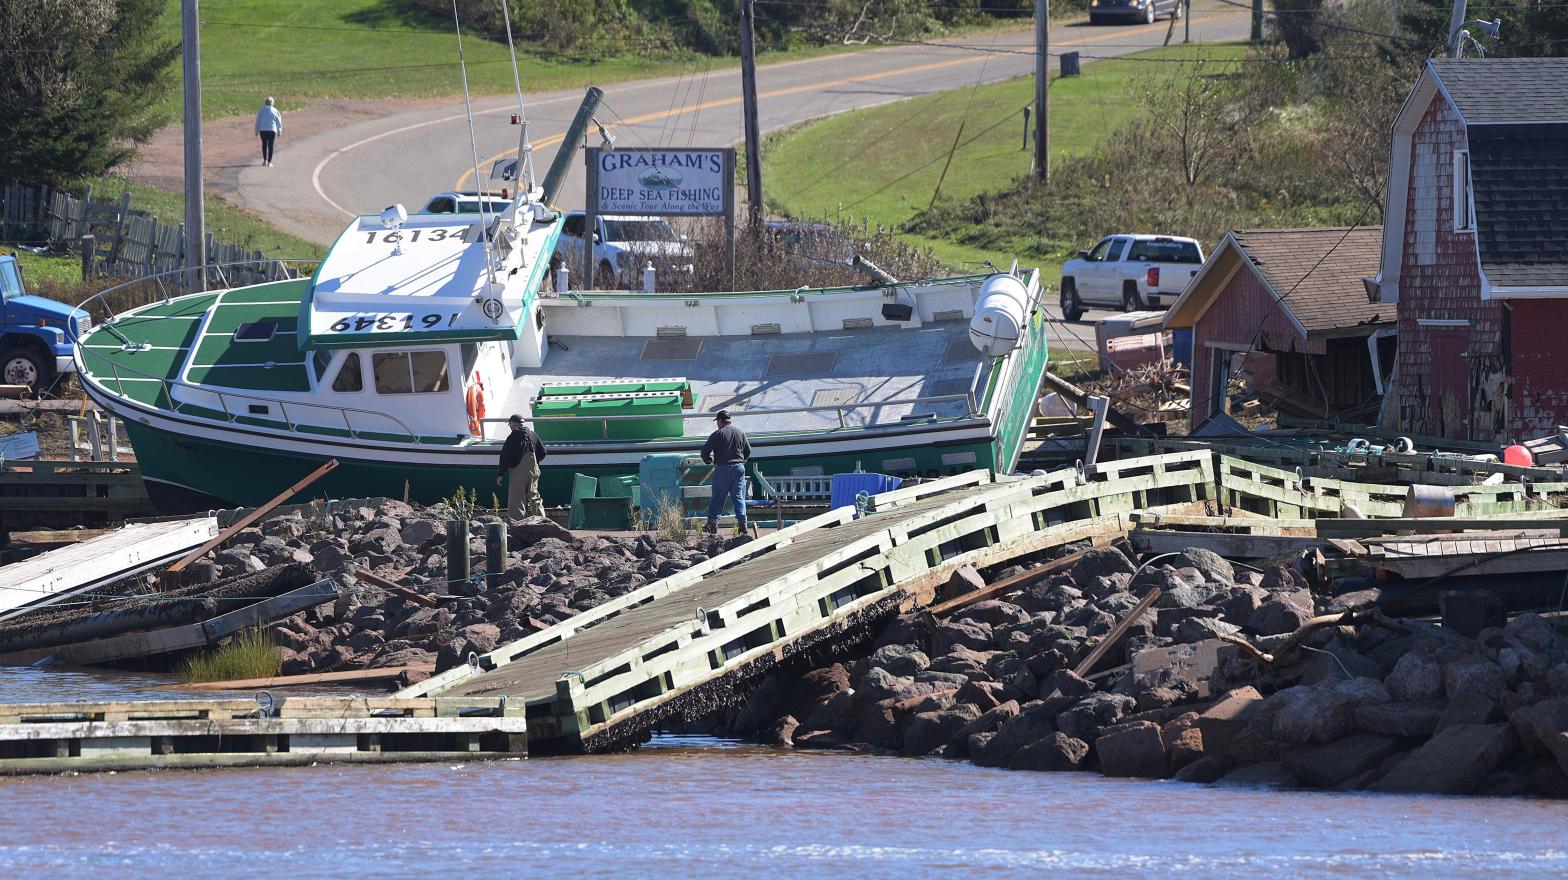 A boat washed ashore on Prince Edward Island in the aftermath of Hurricane Fiona on Sunday September 25. (Photo: Brian McInnis/The Canadian Press, AP)